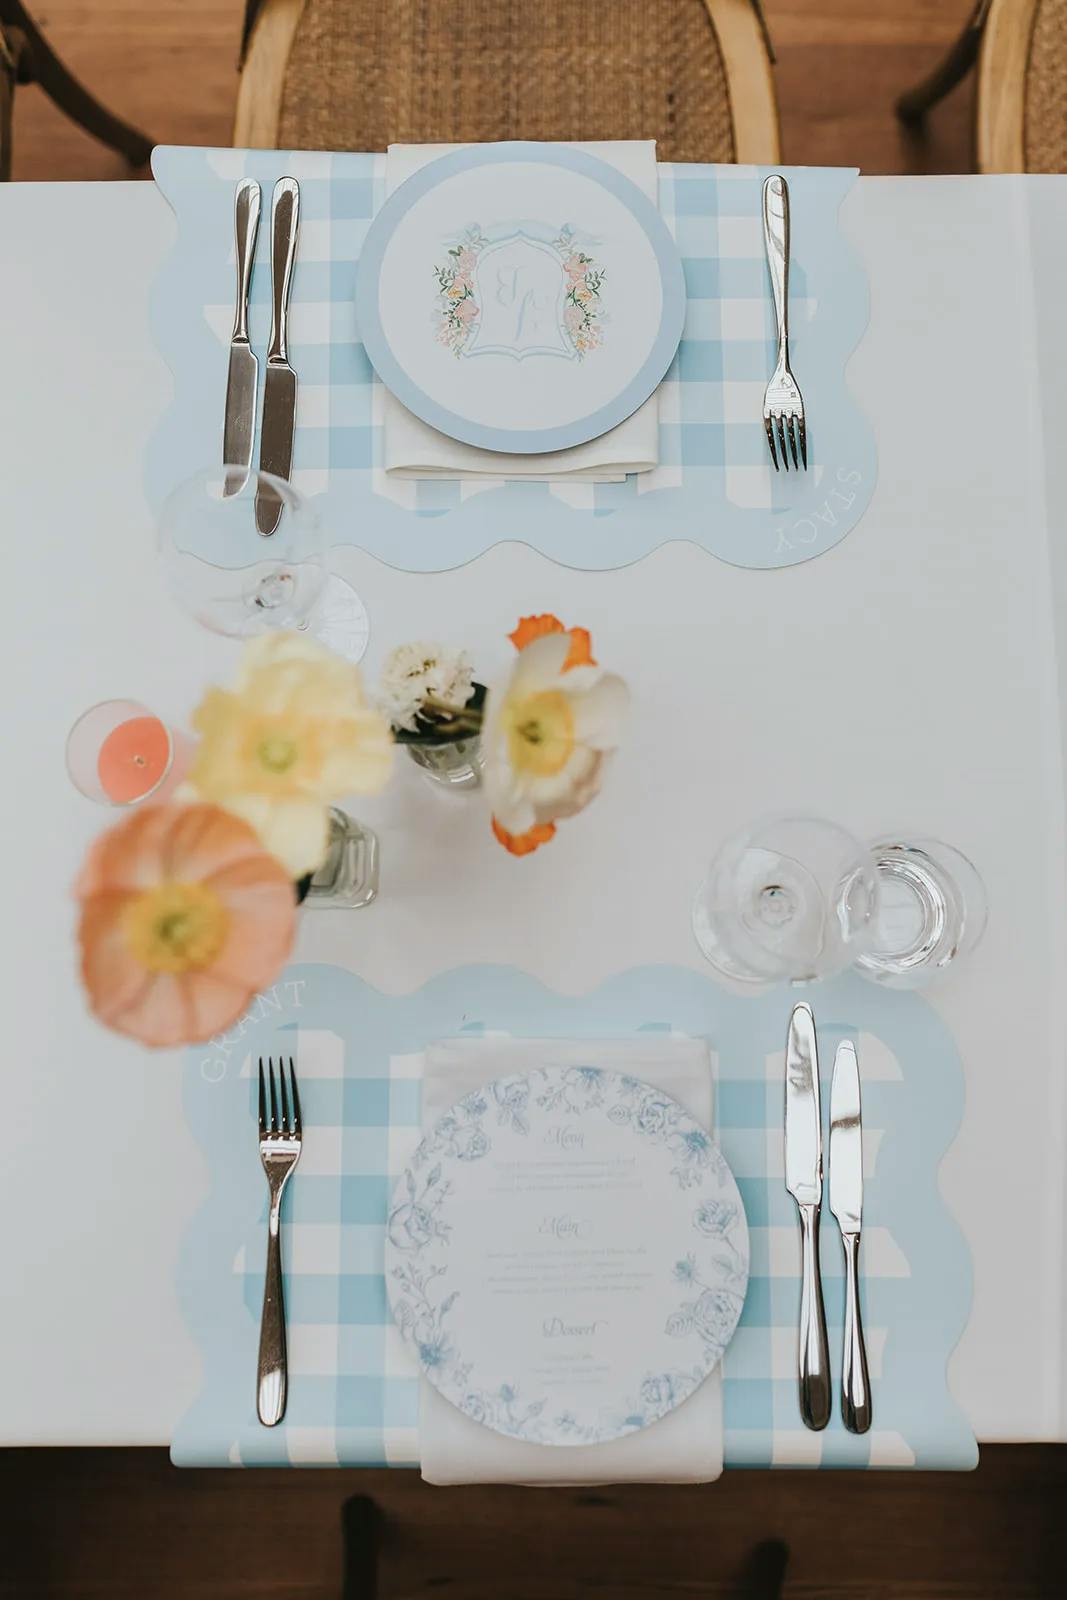 Reception table with table setting